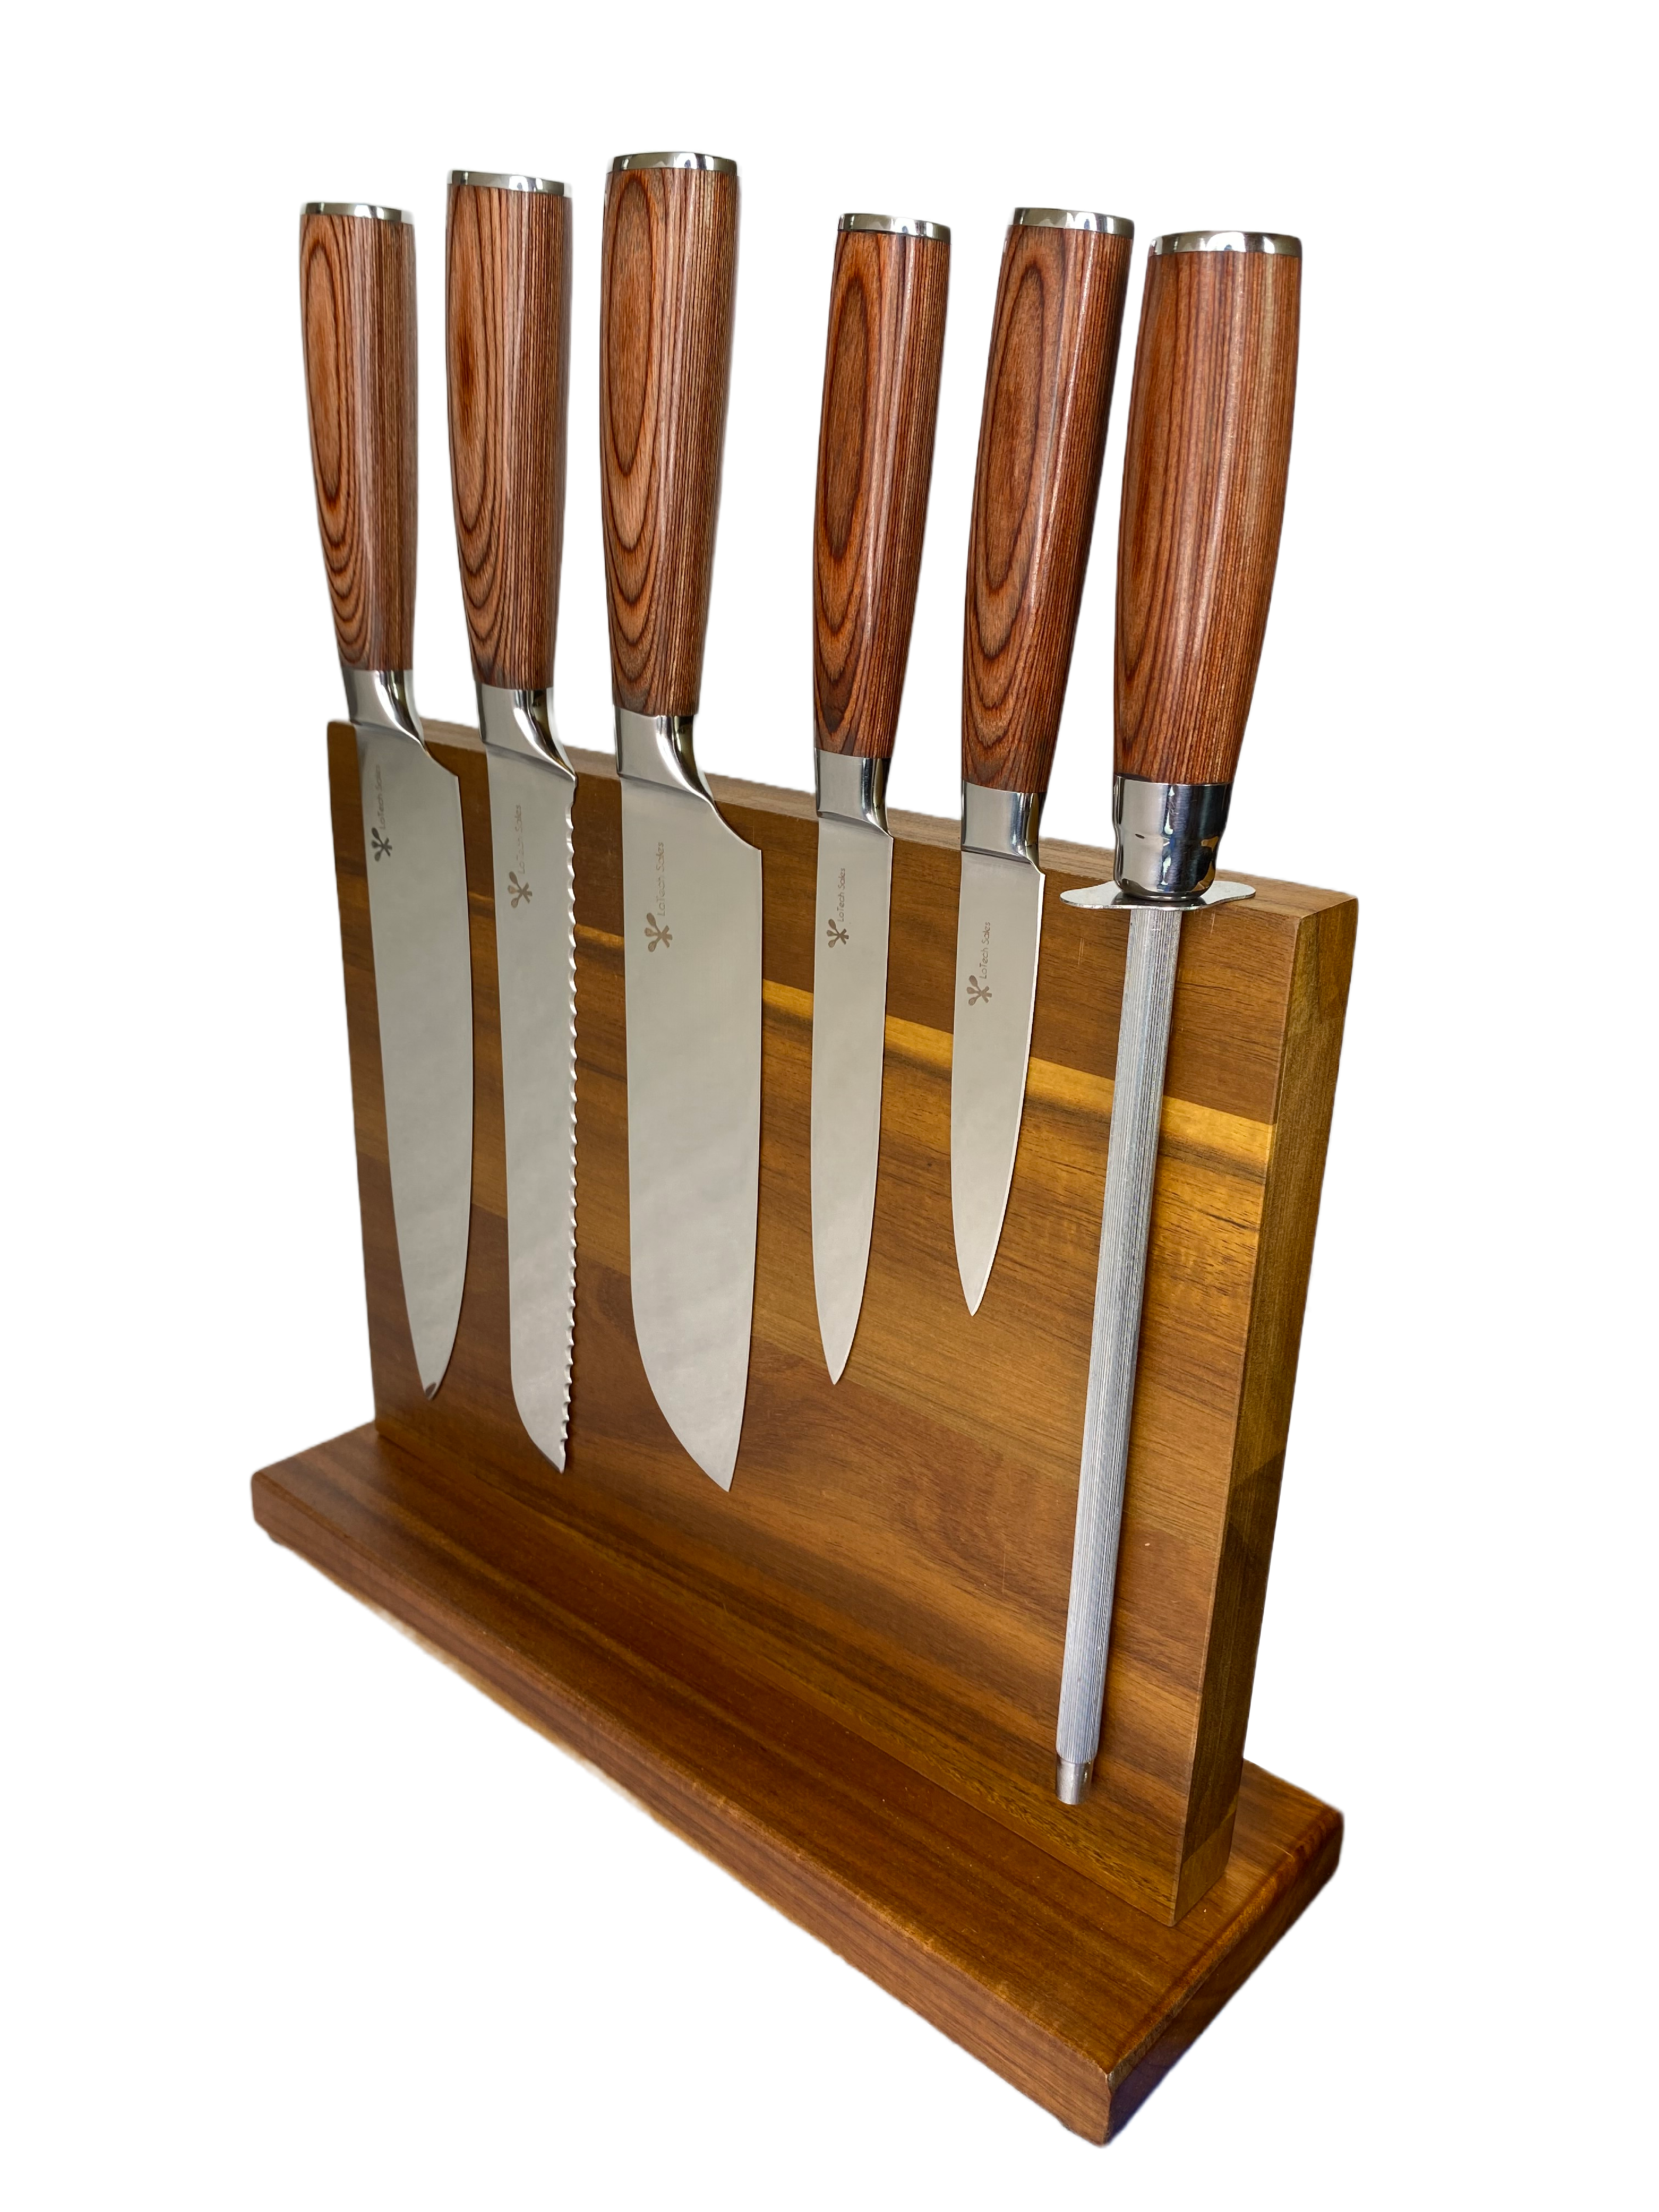 Knife Set With Block Created 20 pcs Block Knives Set HOABLORN Chef's Set:  AK01, Extra Cutting Board in a Luxurious Knife Holder, Big Value and  Elegant